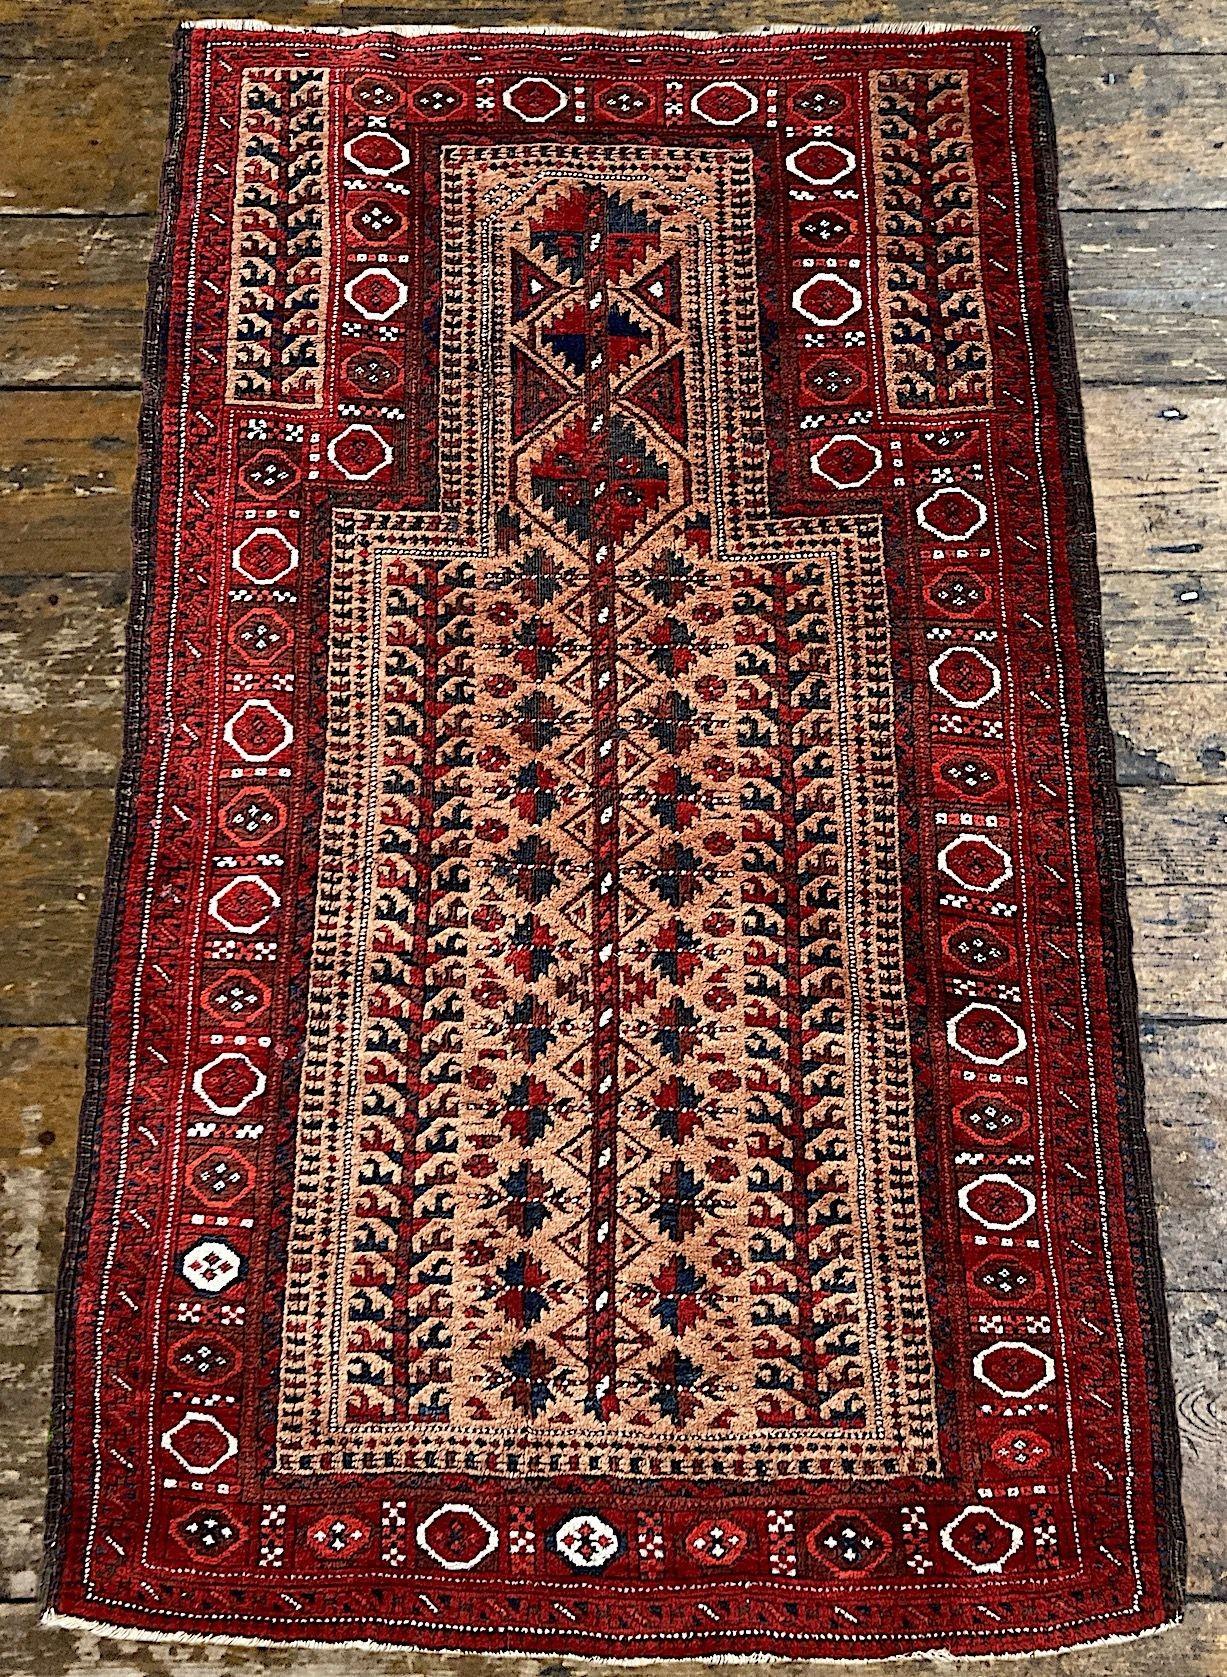 Early 20th Century Antique Belouch Rug 1.76m x 0.89m